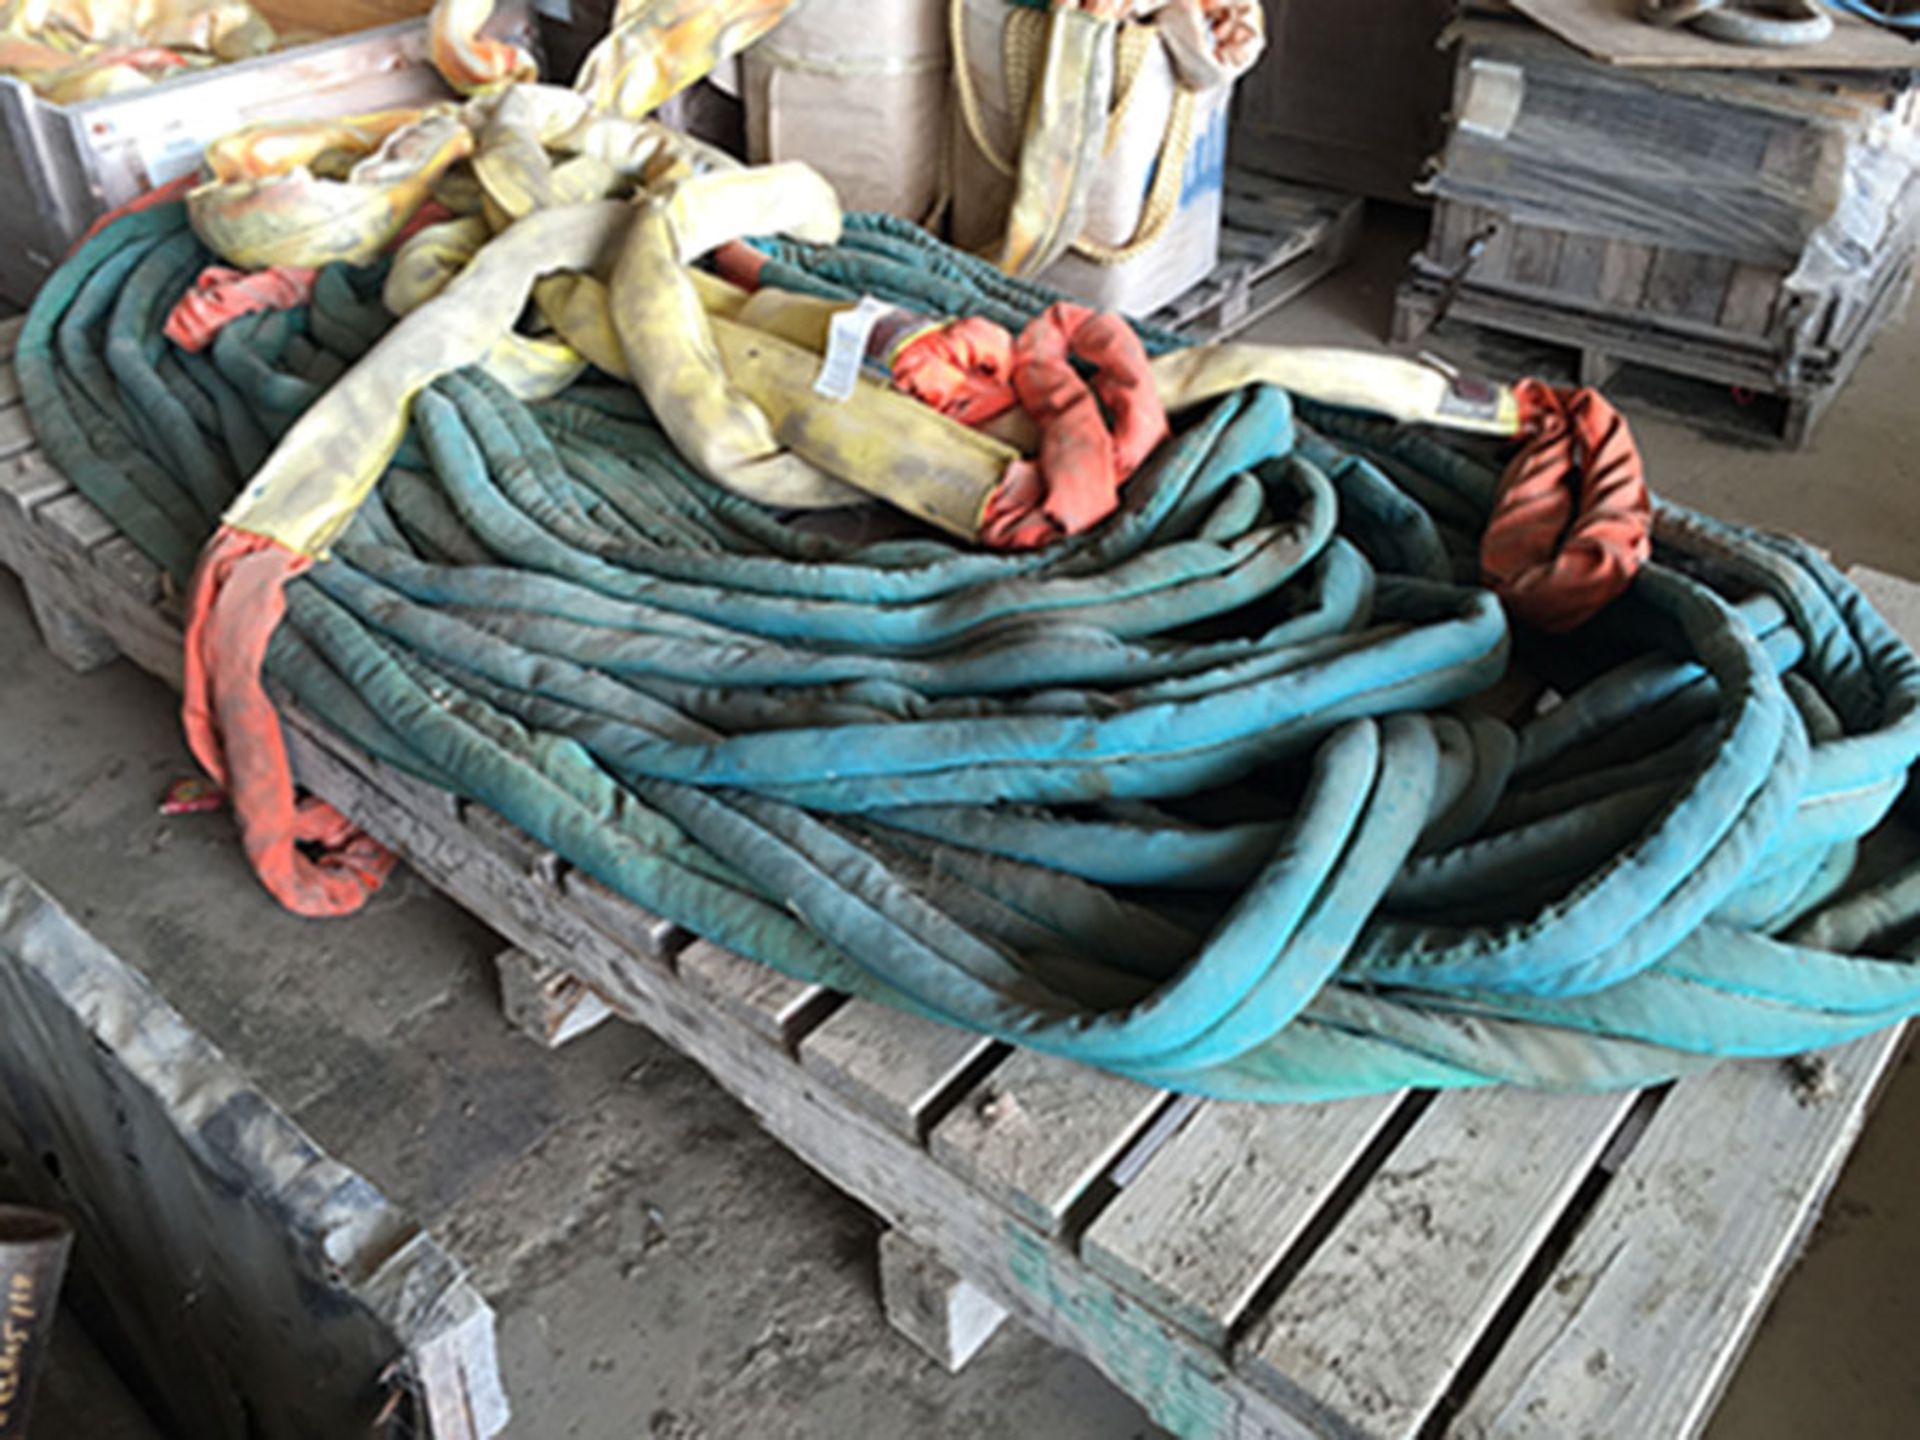 APPROXIMATELY (50) SKIDS/PALLETS/BOXES/CRATES/JOB BOXES OF ASSORTED RIGGING INCLUDING: 100'S OF - Image 6 of 36